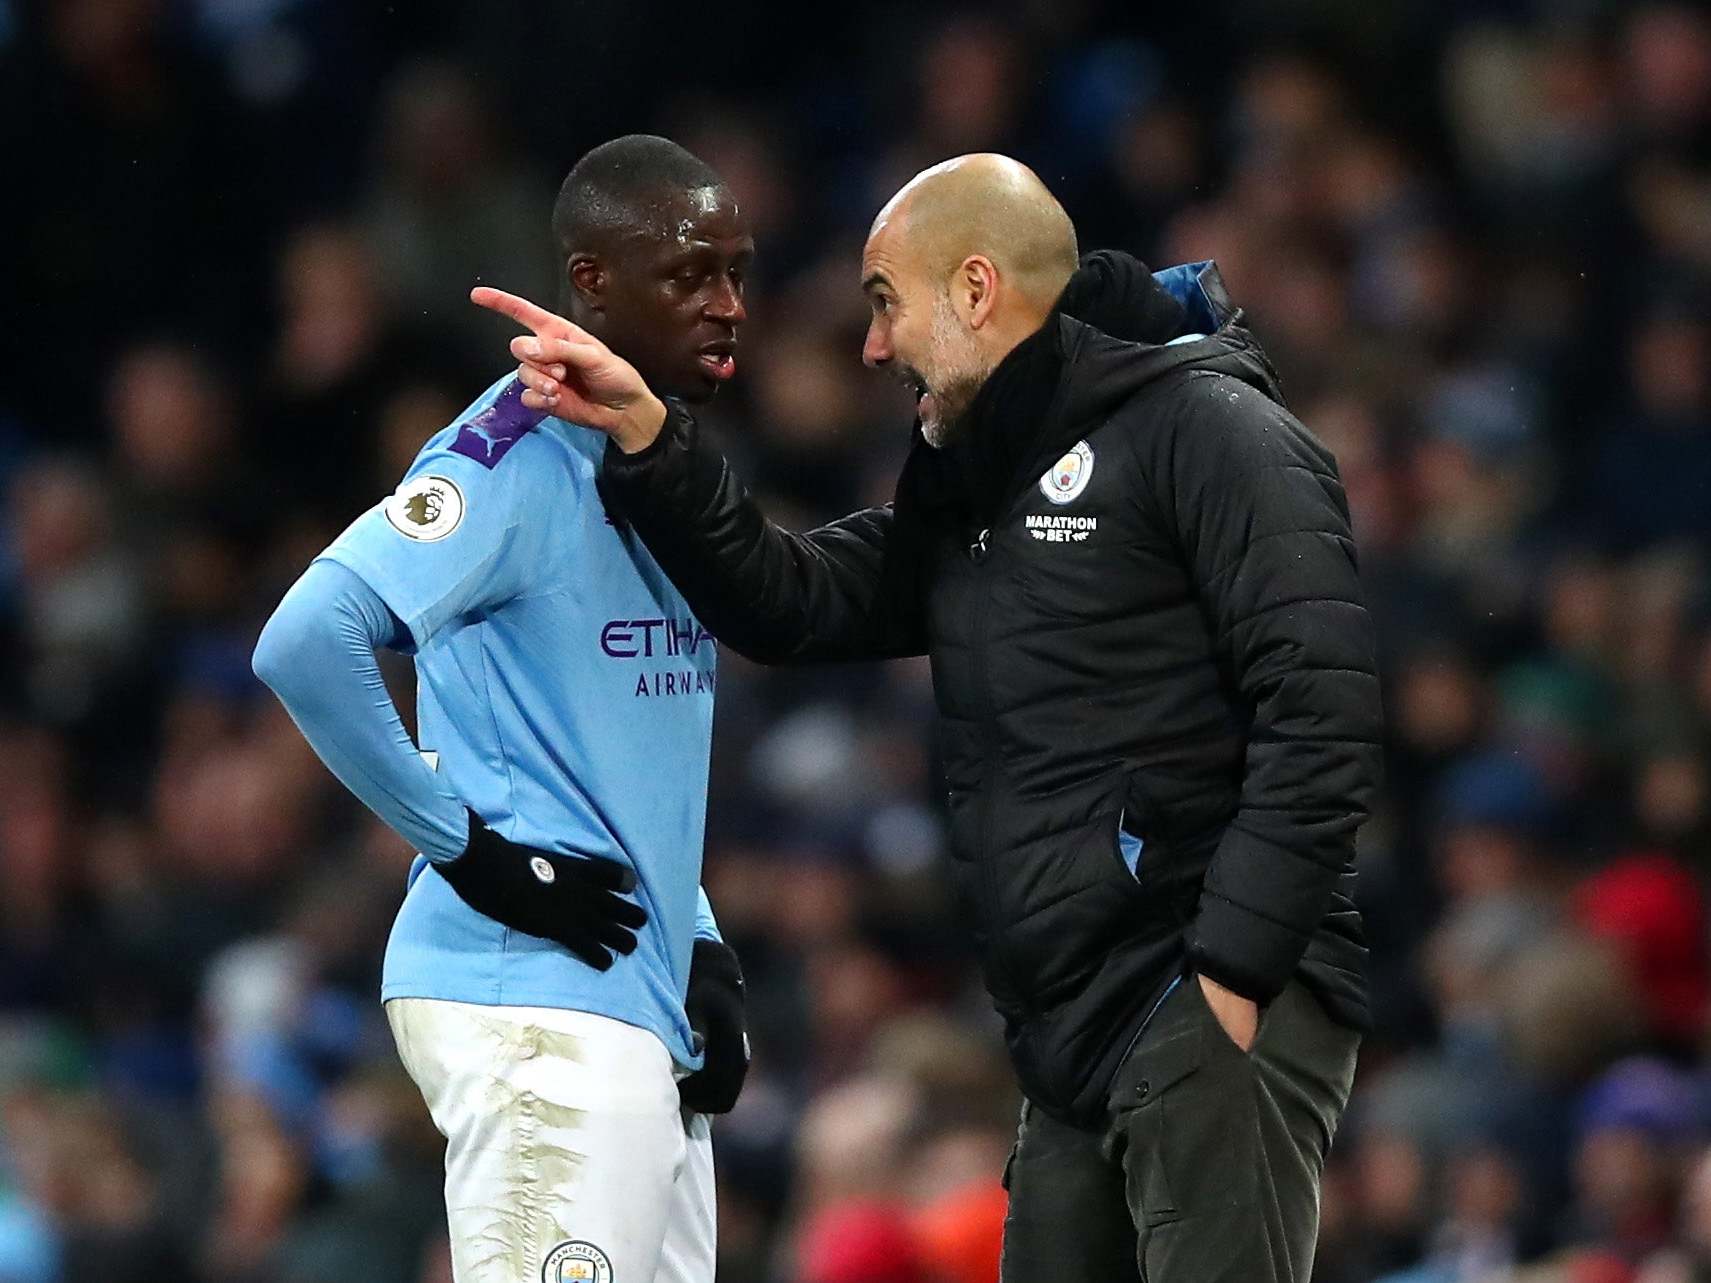 Pep Guardiola has struggled to get the best out of Benjamin Mendy